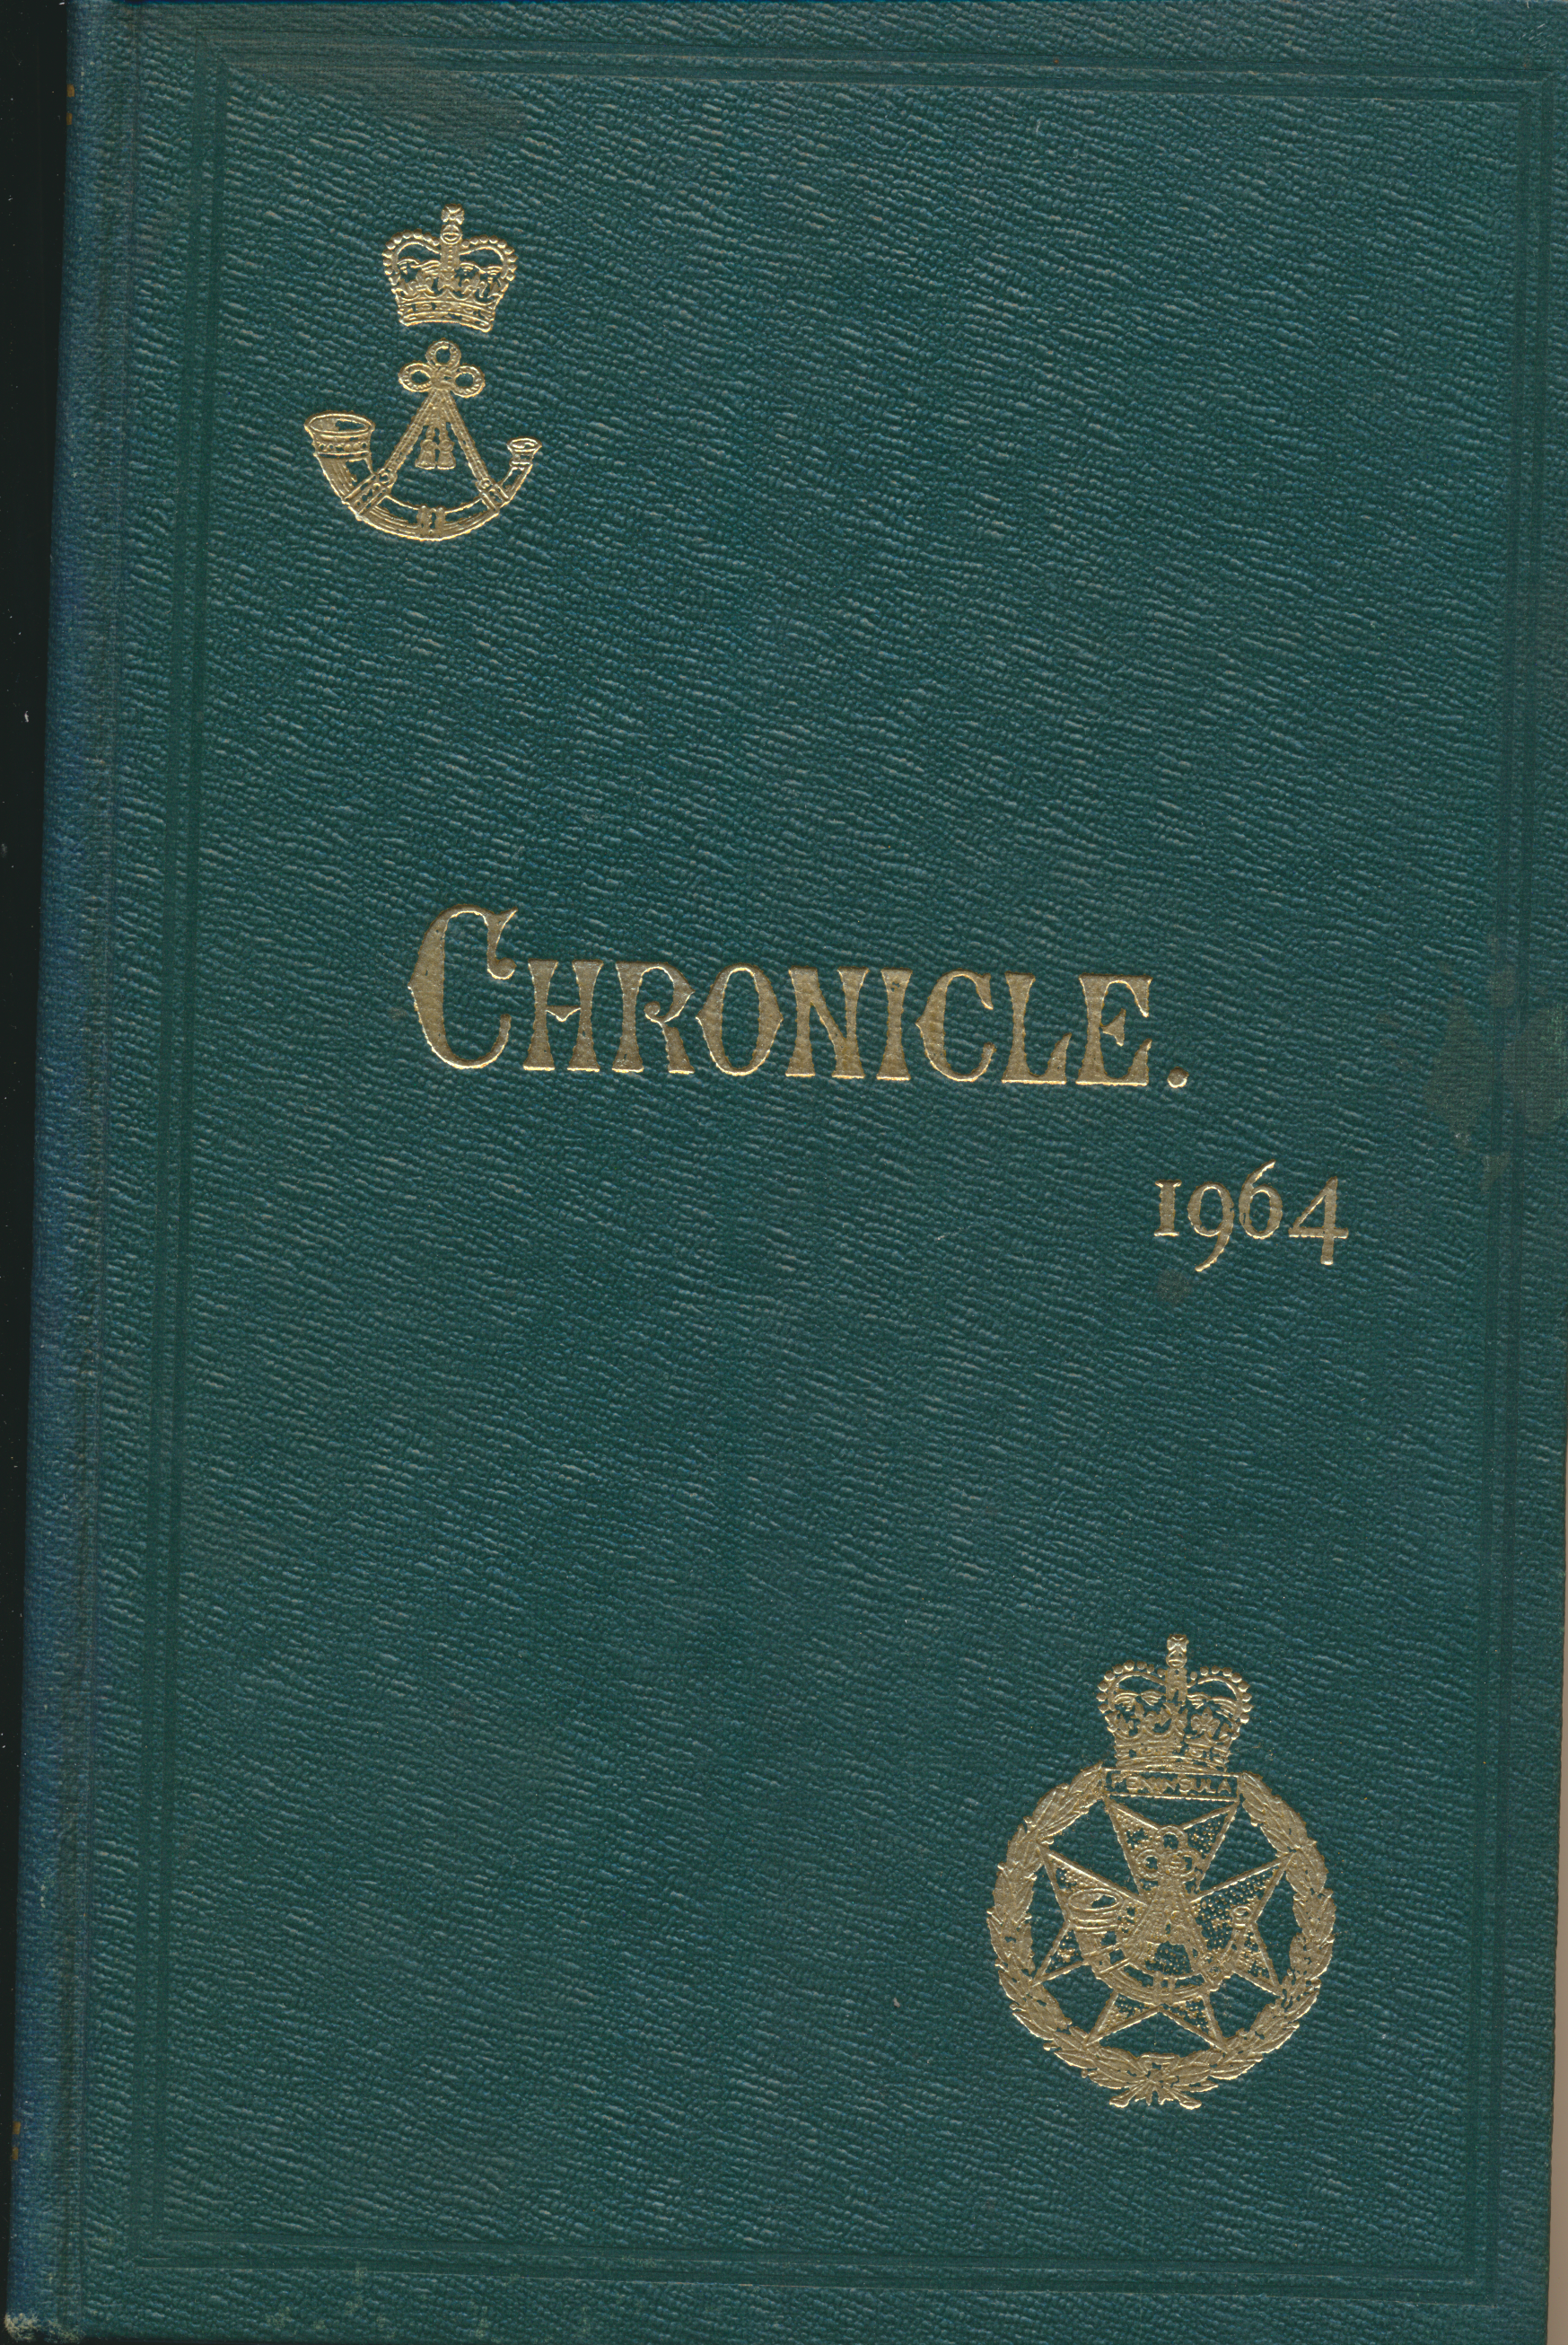 Chronicle of 1st Green Jackets, 43rd and 52nd and The Oxfordshire and Buckinghamshire Light Infantry Chronicle 1964